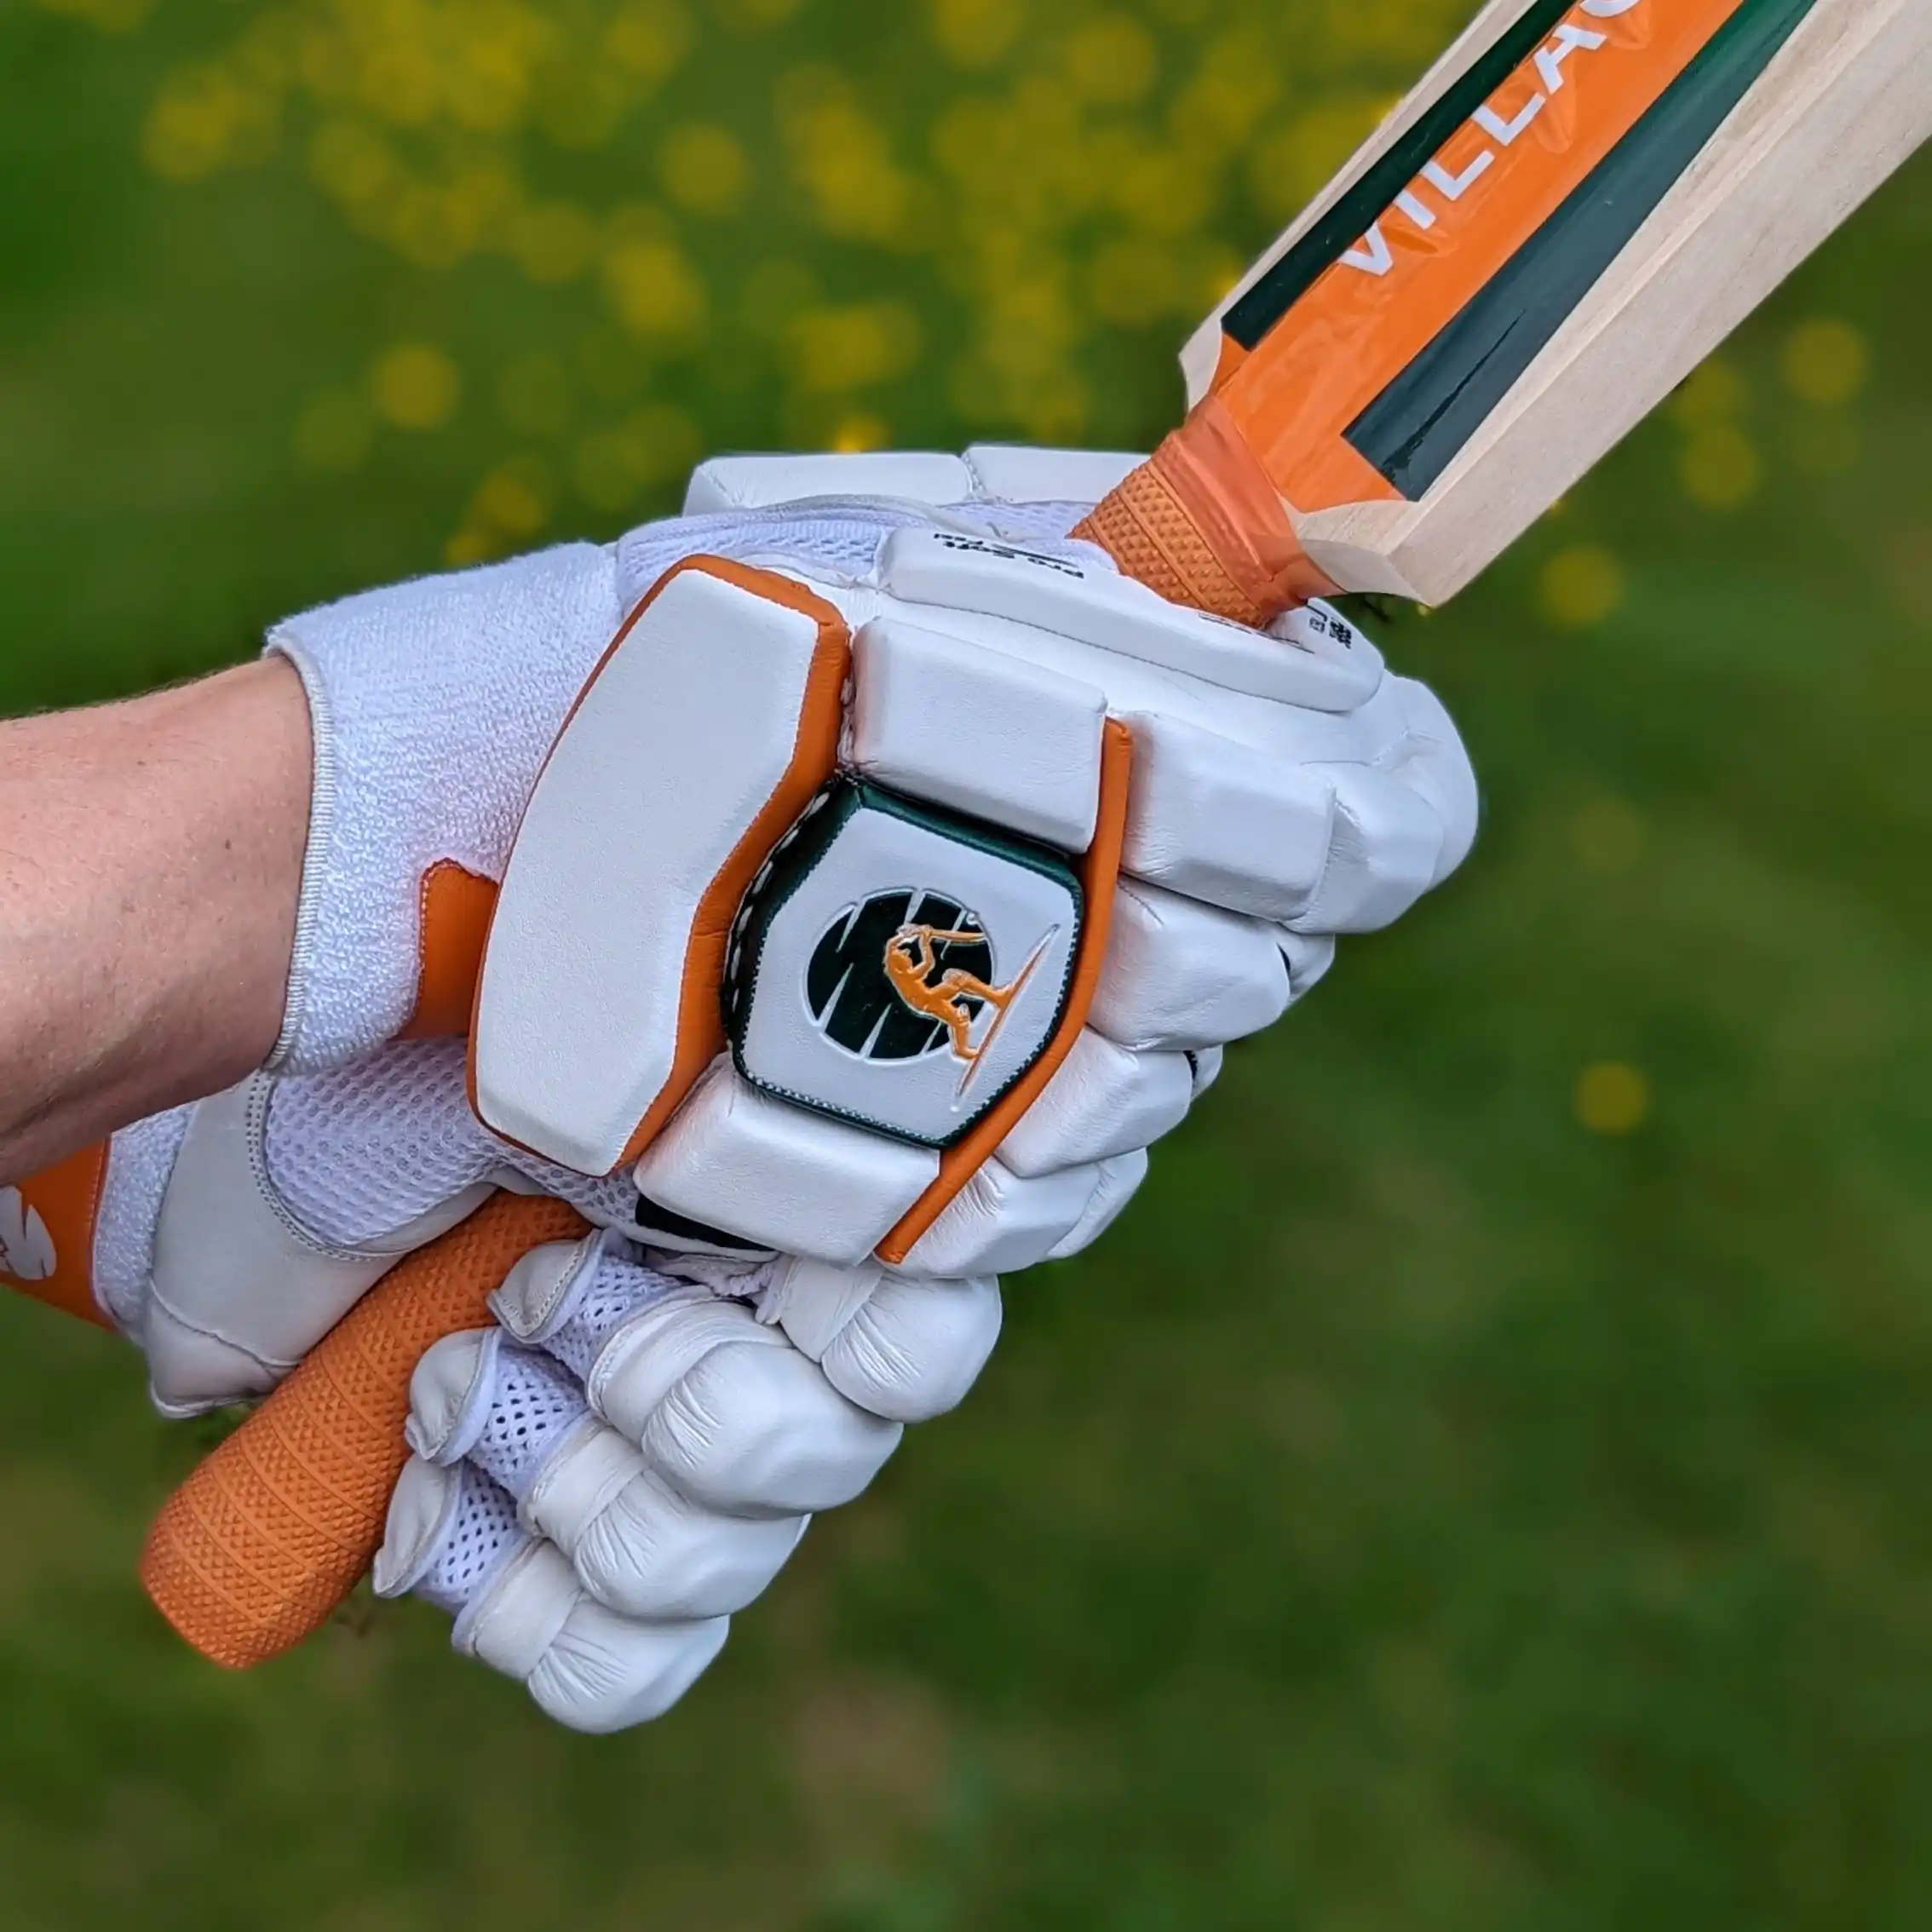 Role of Gloves and Handle cricket